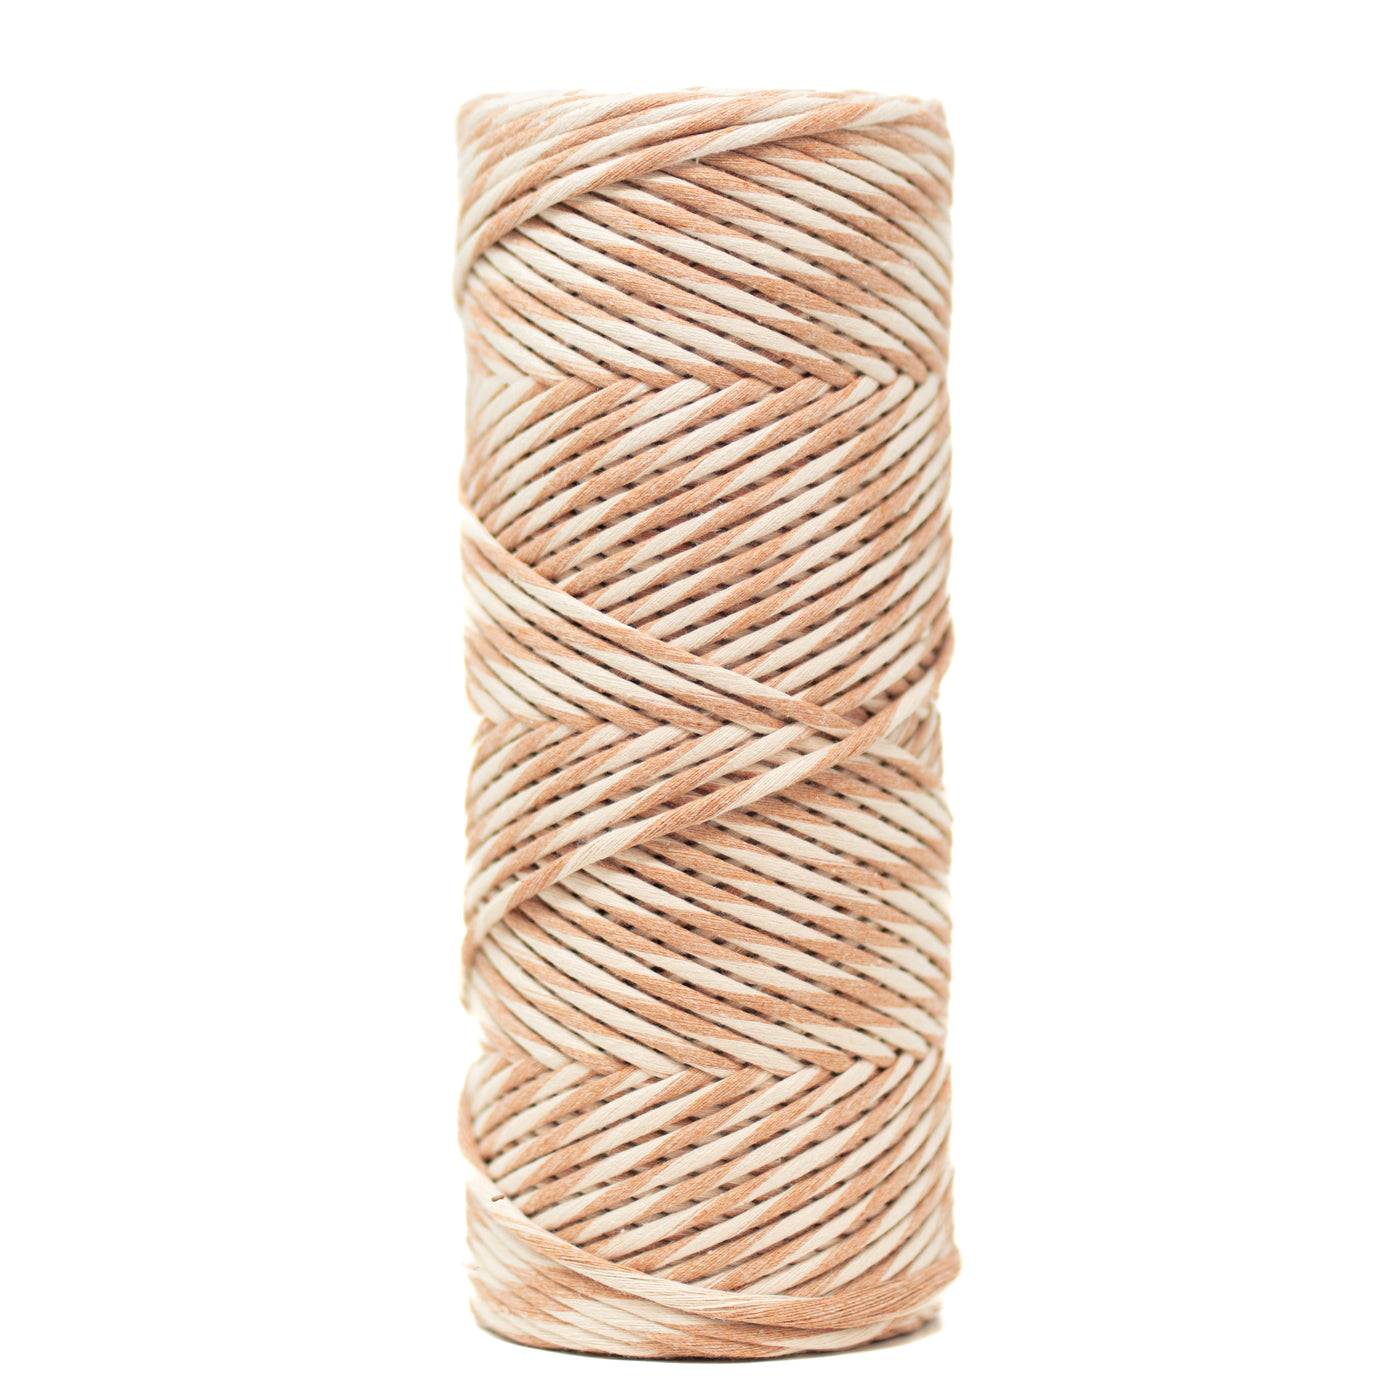 DUAL RECYCLED COTTON MACRAME CORD 4 MM - SINGLE STRAND - COCOA + ALMOND COLOR